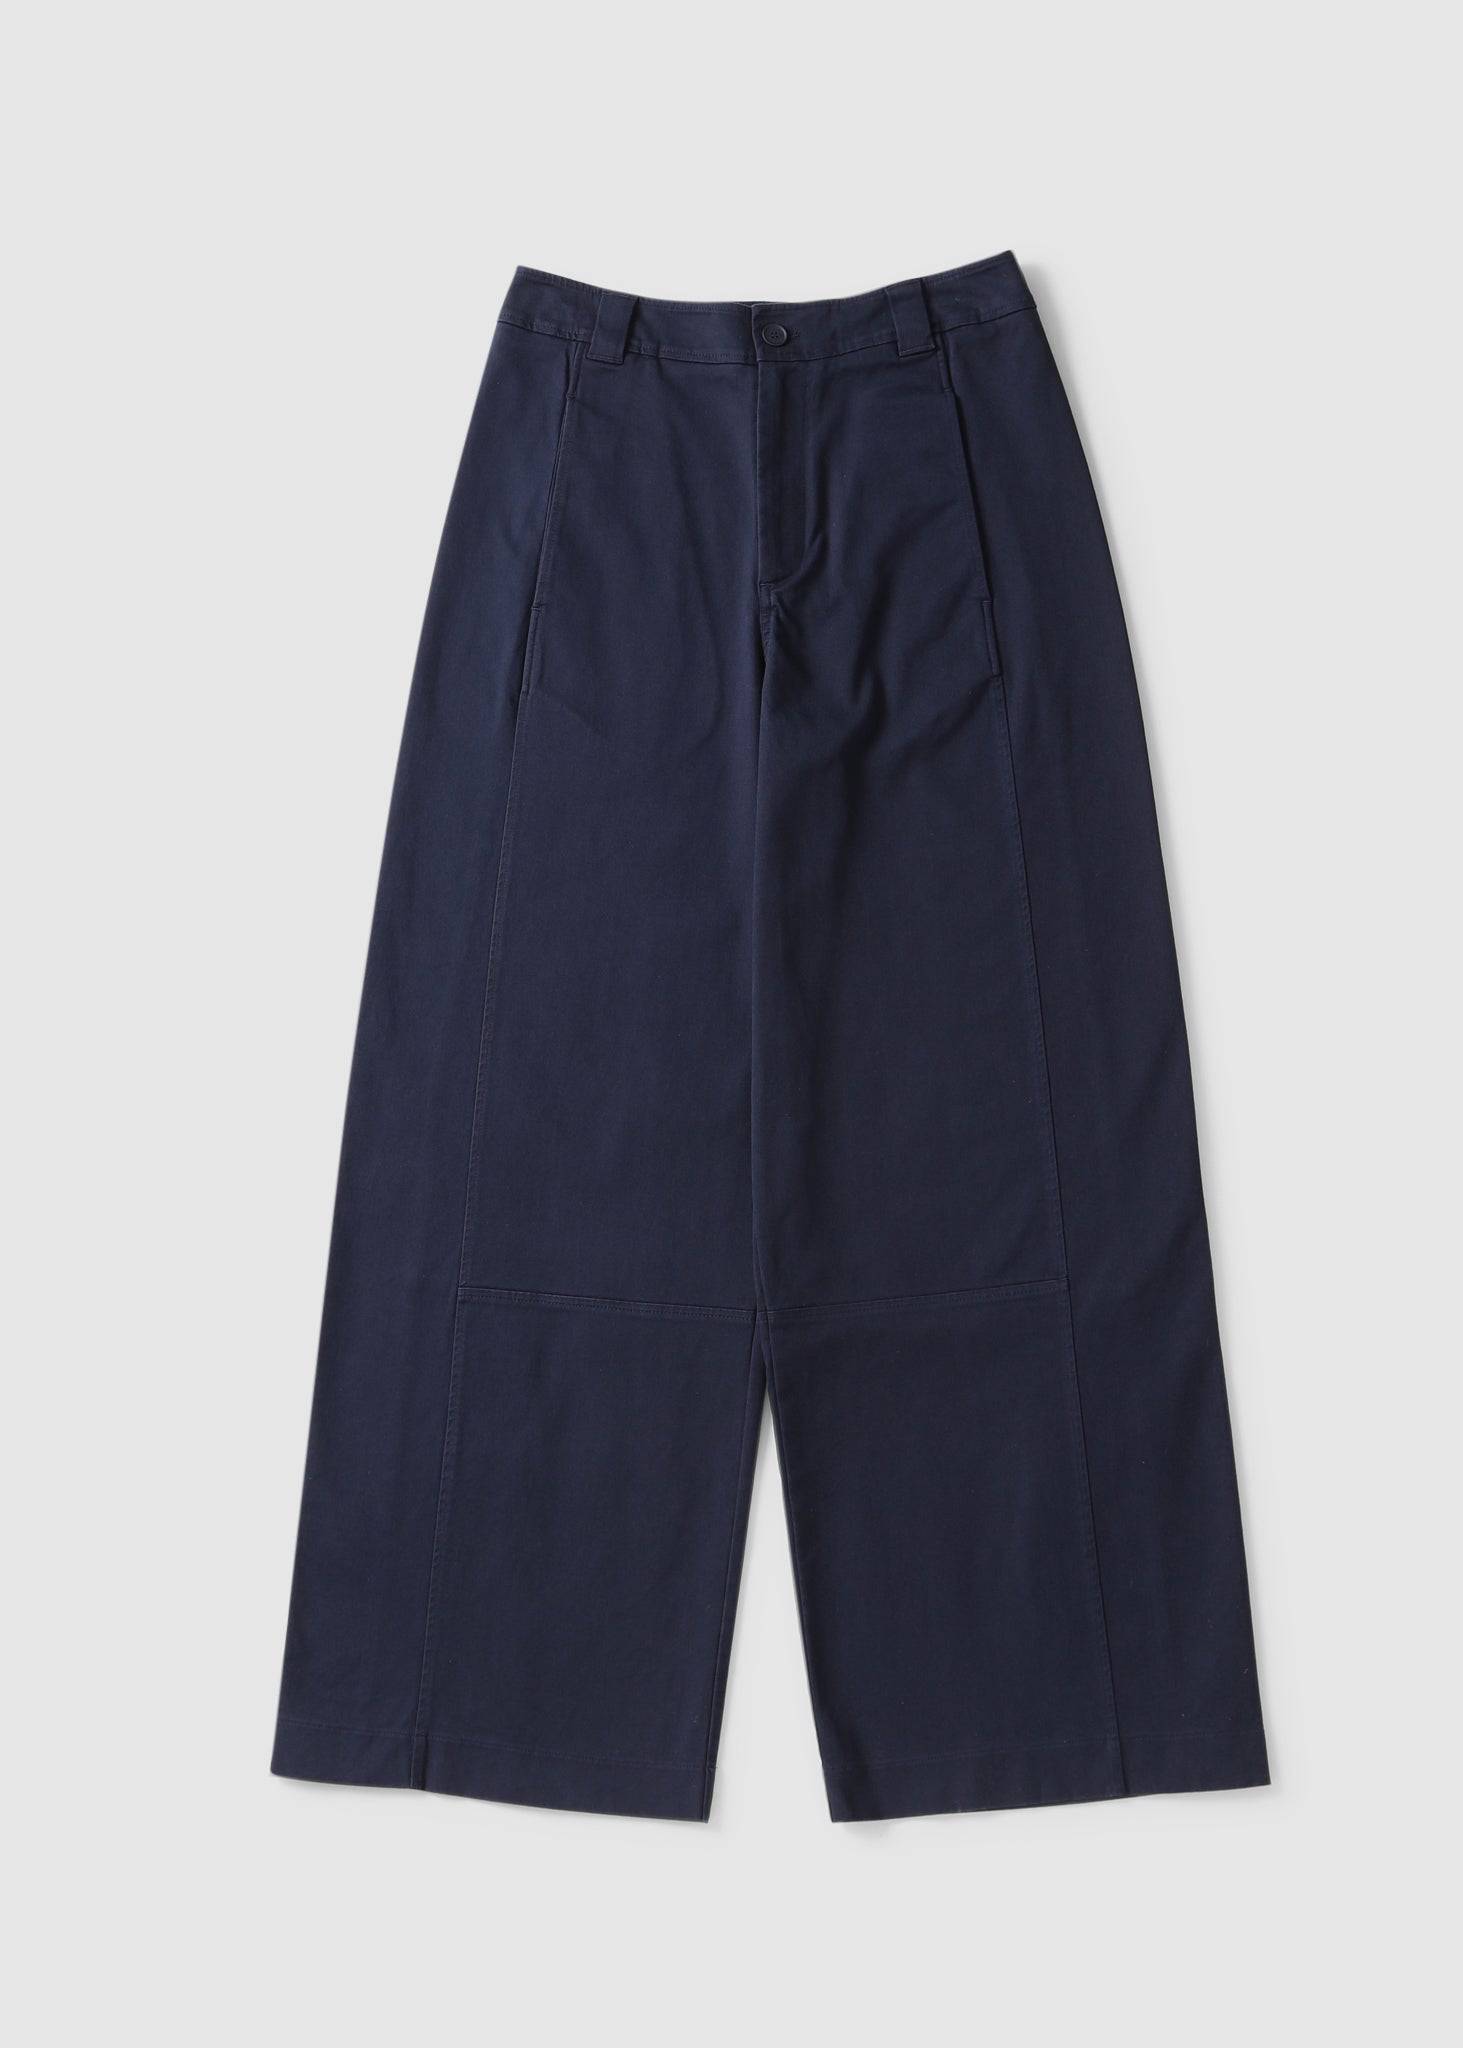 Image of Lacoste Womens Tailored Wide Leg Garbadine Trousers In Navy